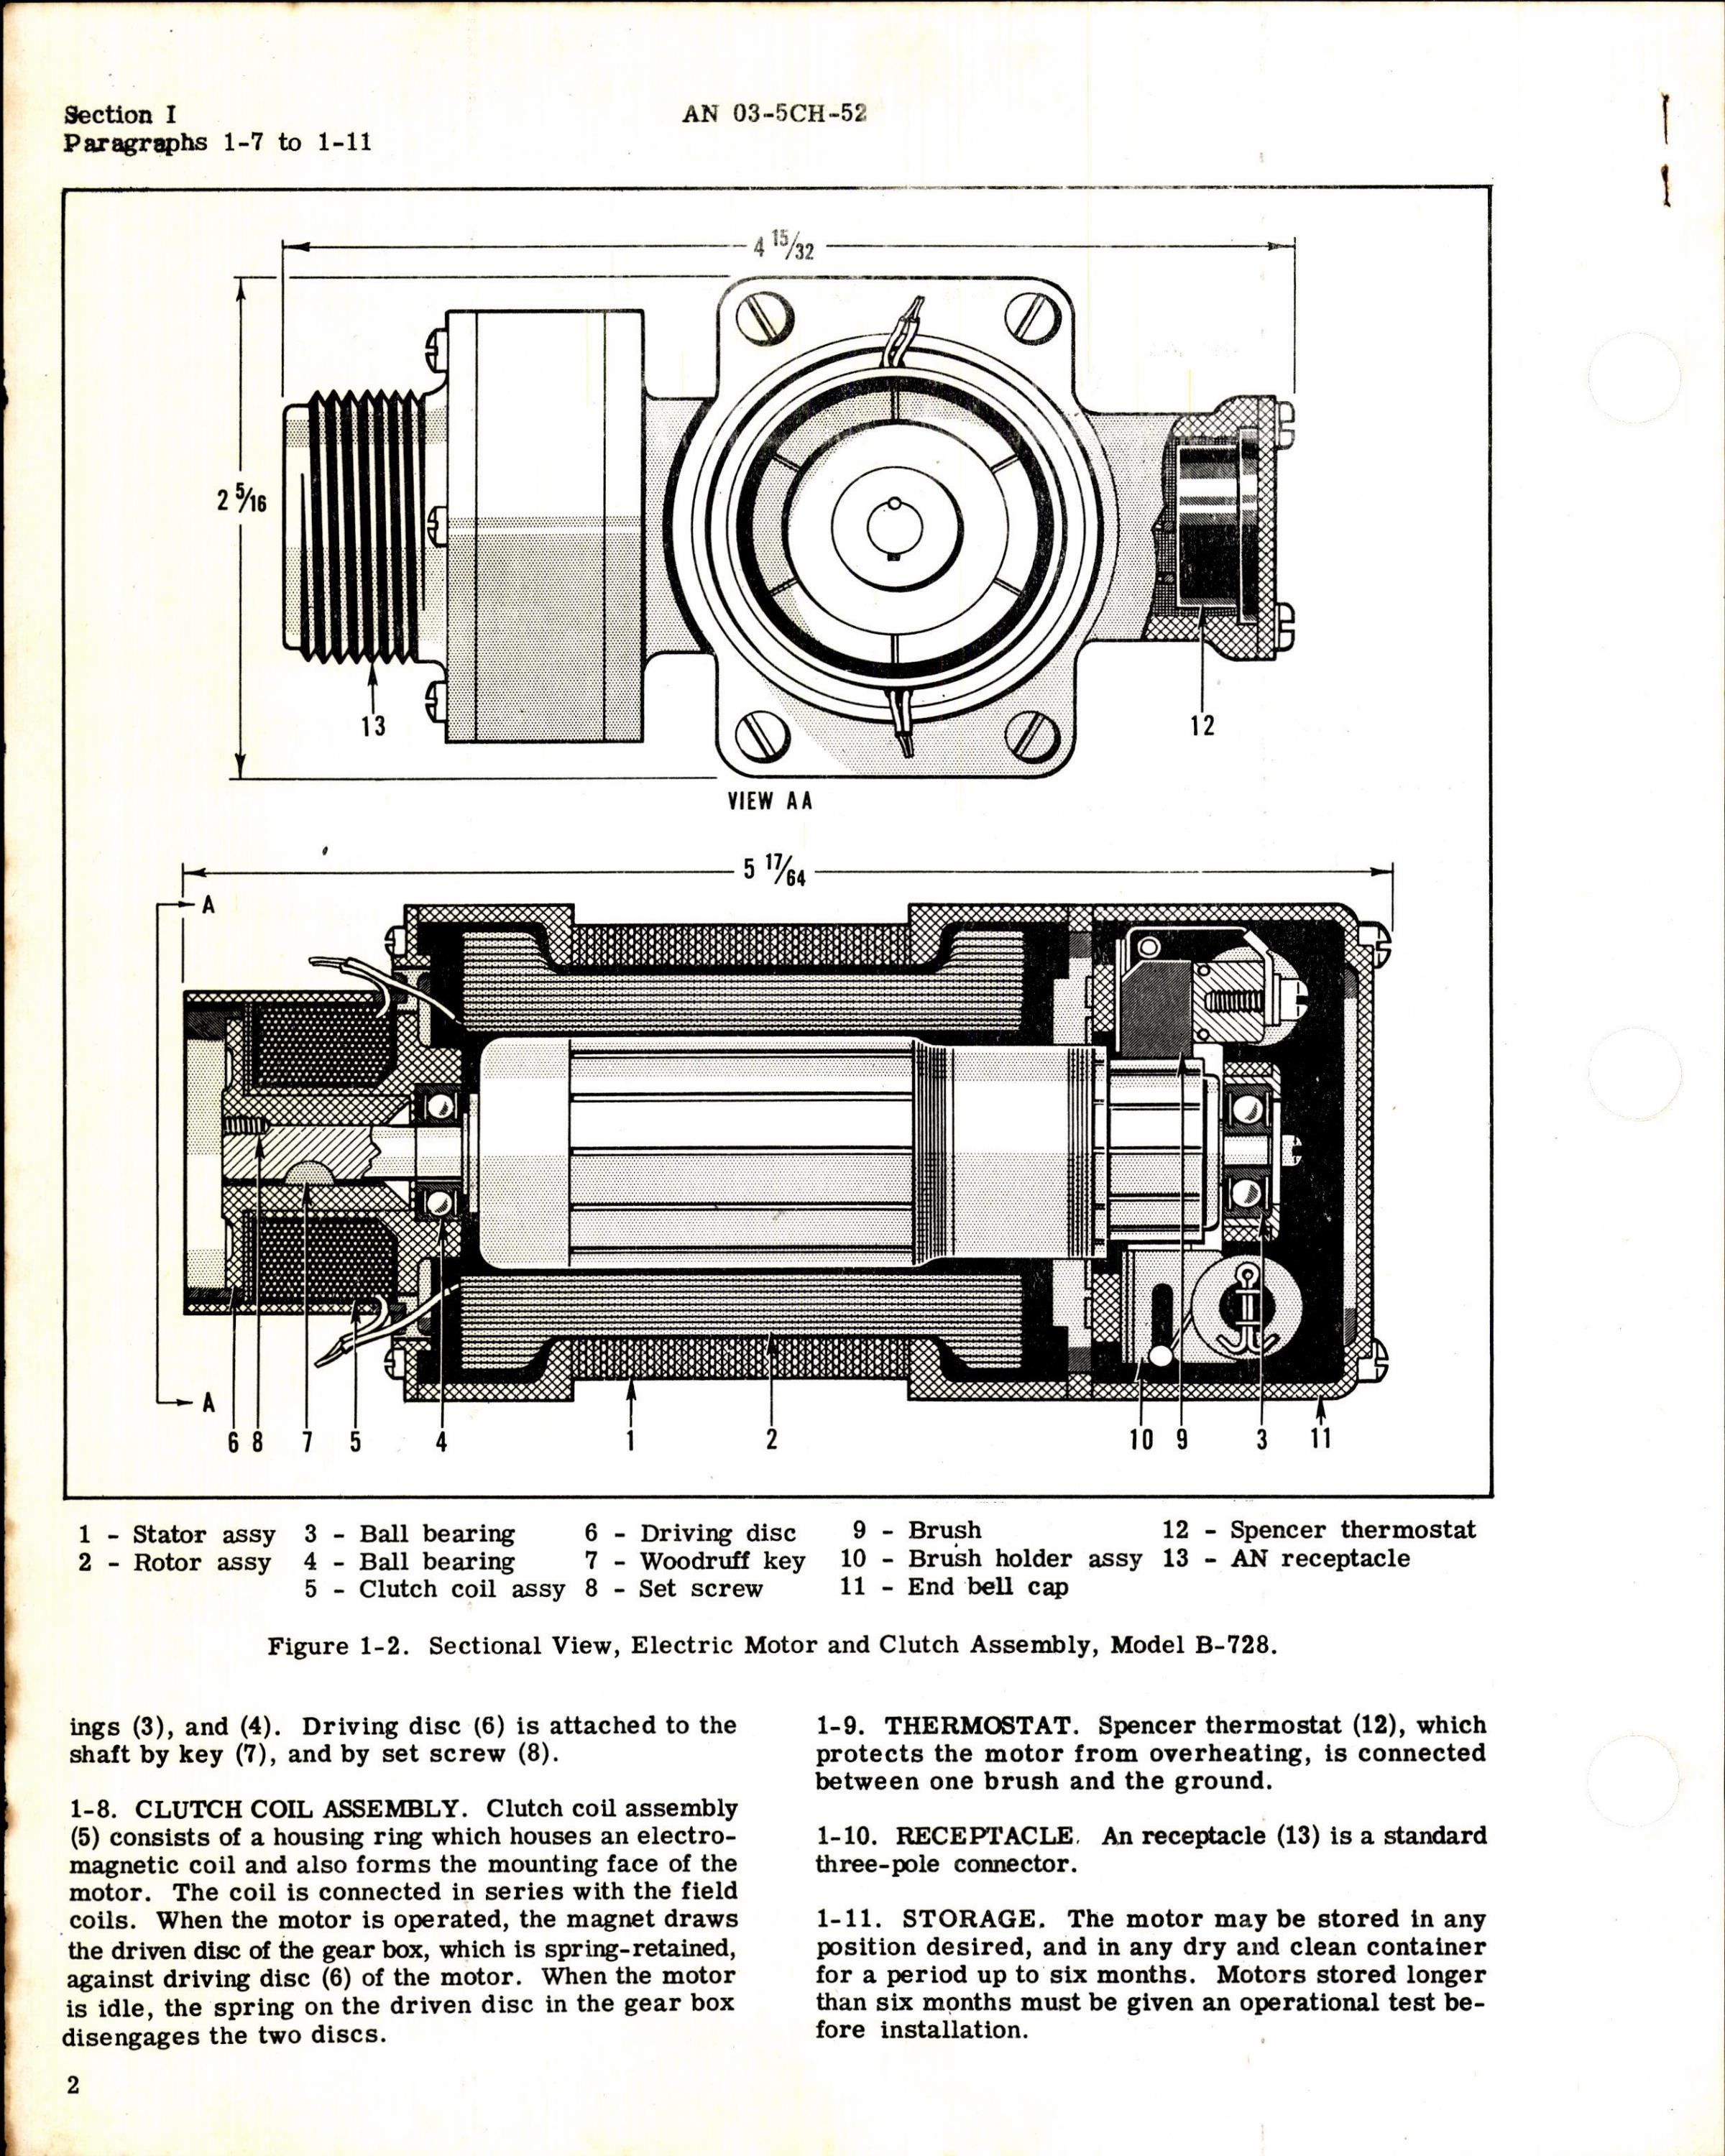 Sample page 4 from AirCorps Library document: Overhaul Instructions for Electric Motor and Clutch Assembly Model B-728